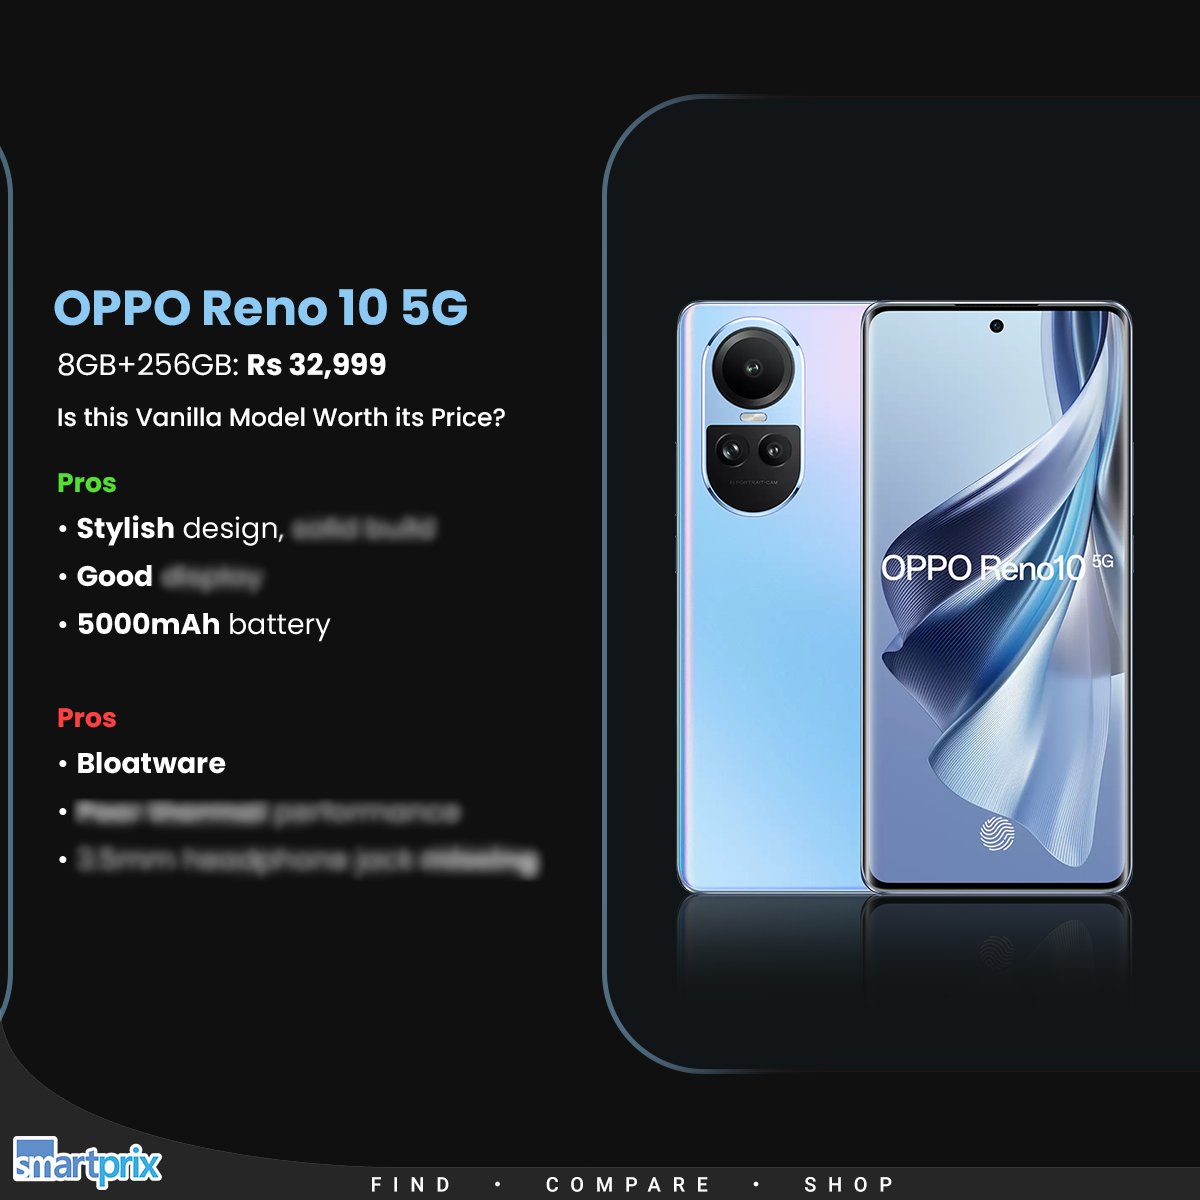 Smartprix on X: The Pros and Cons of Oppo Reno 10 5G   #OPPOReno10 #OPPO #Review   / X